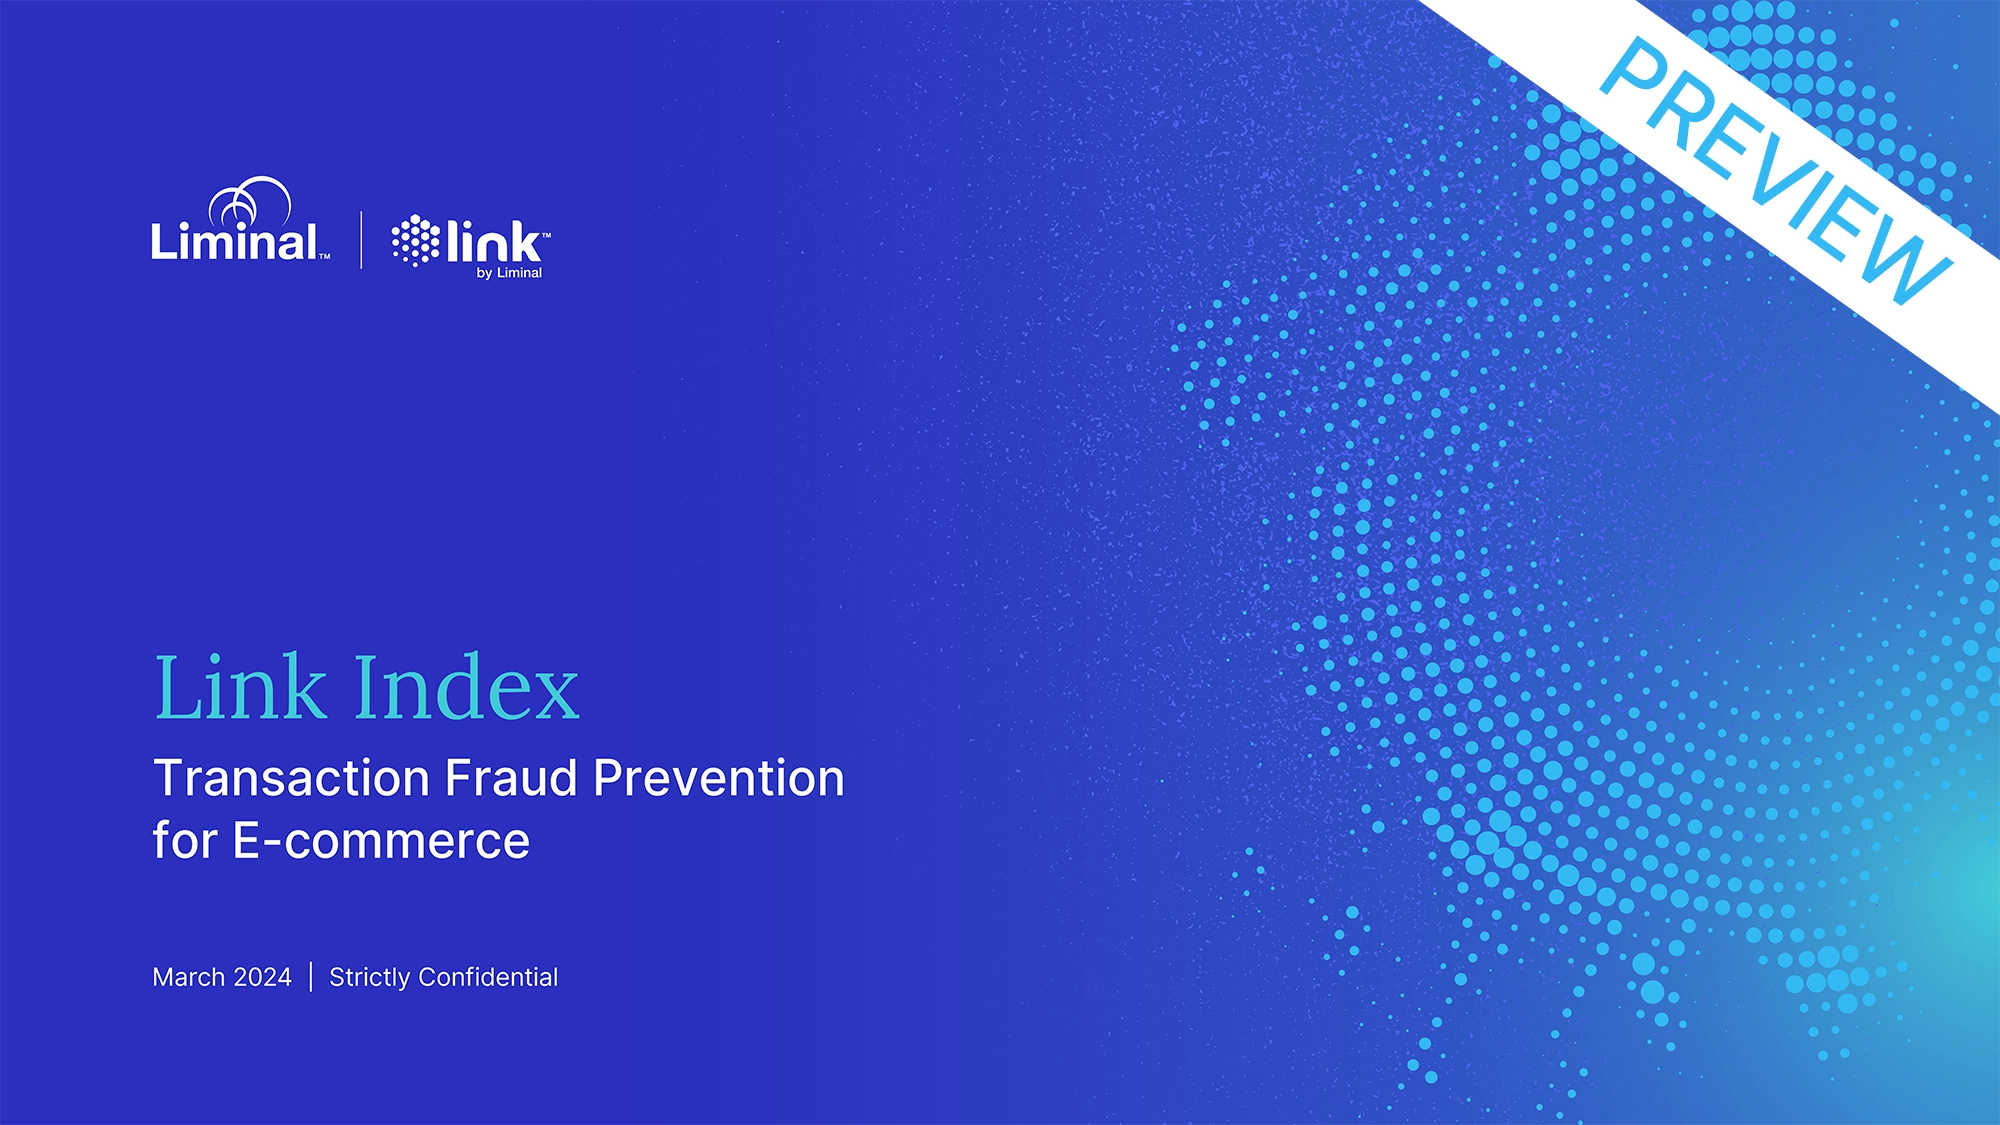 Link Index Preview_Transaction Fraud Prevention E-Commerce 2024 1